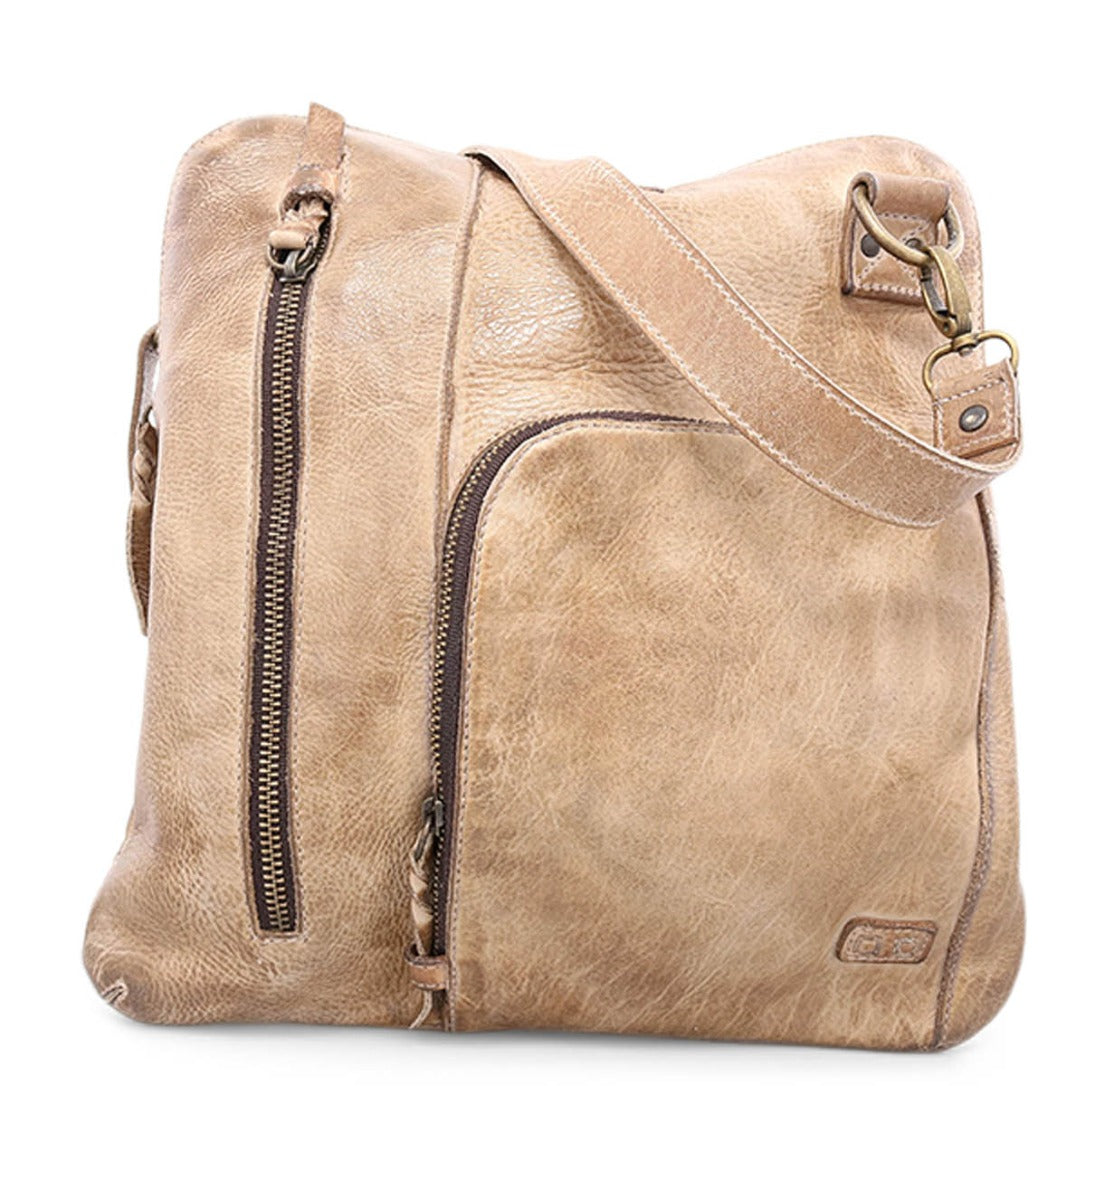 An Aiken tan leather crossbody bag with zippers by Bed Stu.